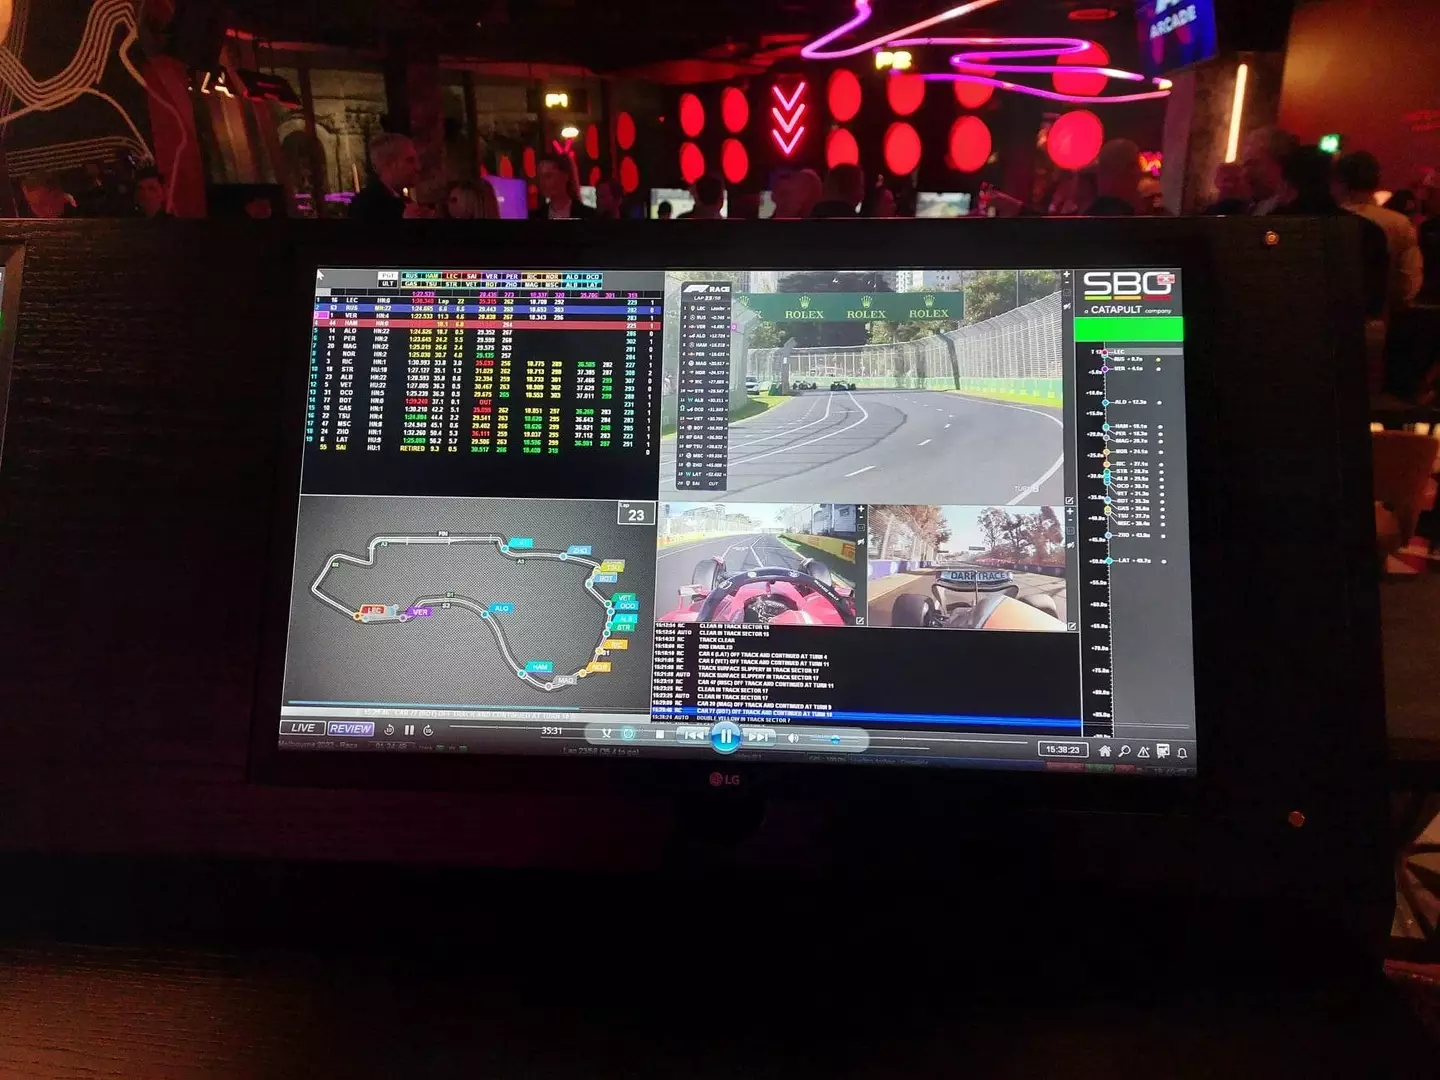 Watch highlights and check data from classic races on the screens. Image: F1 Arcade